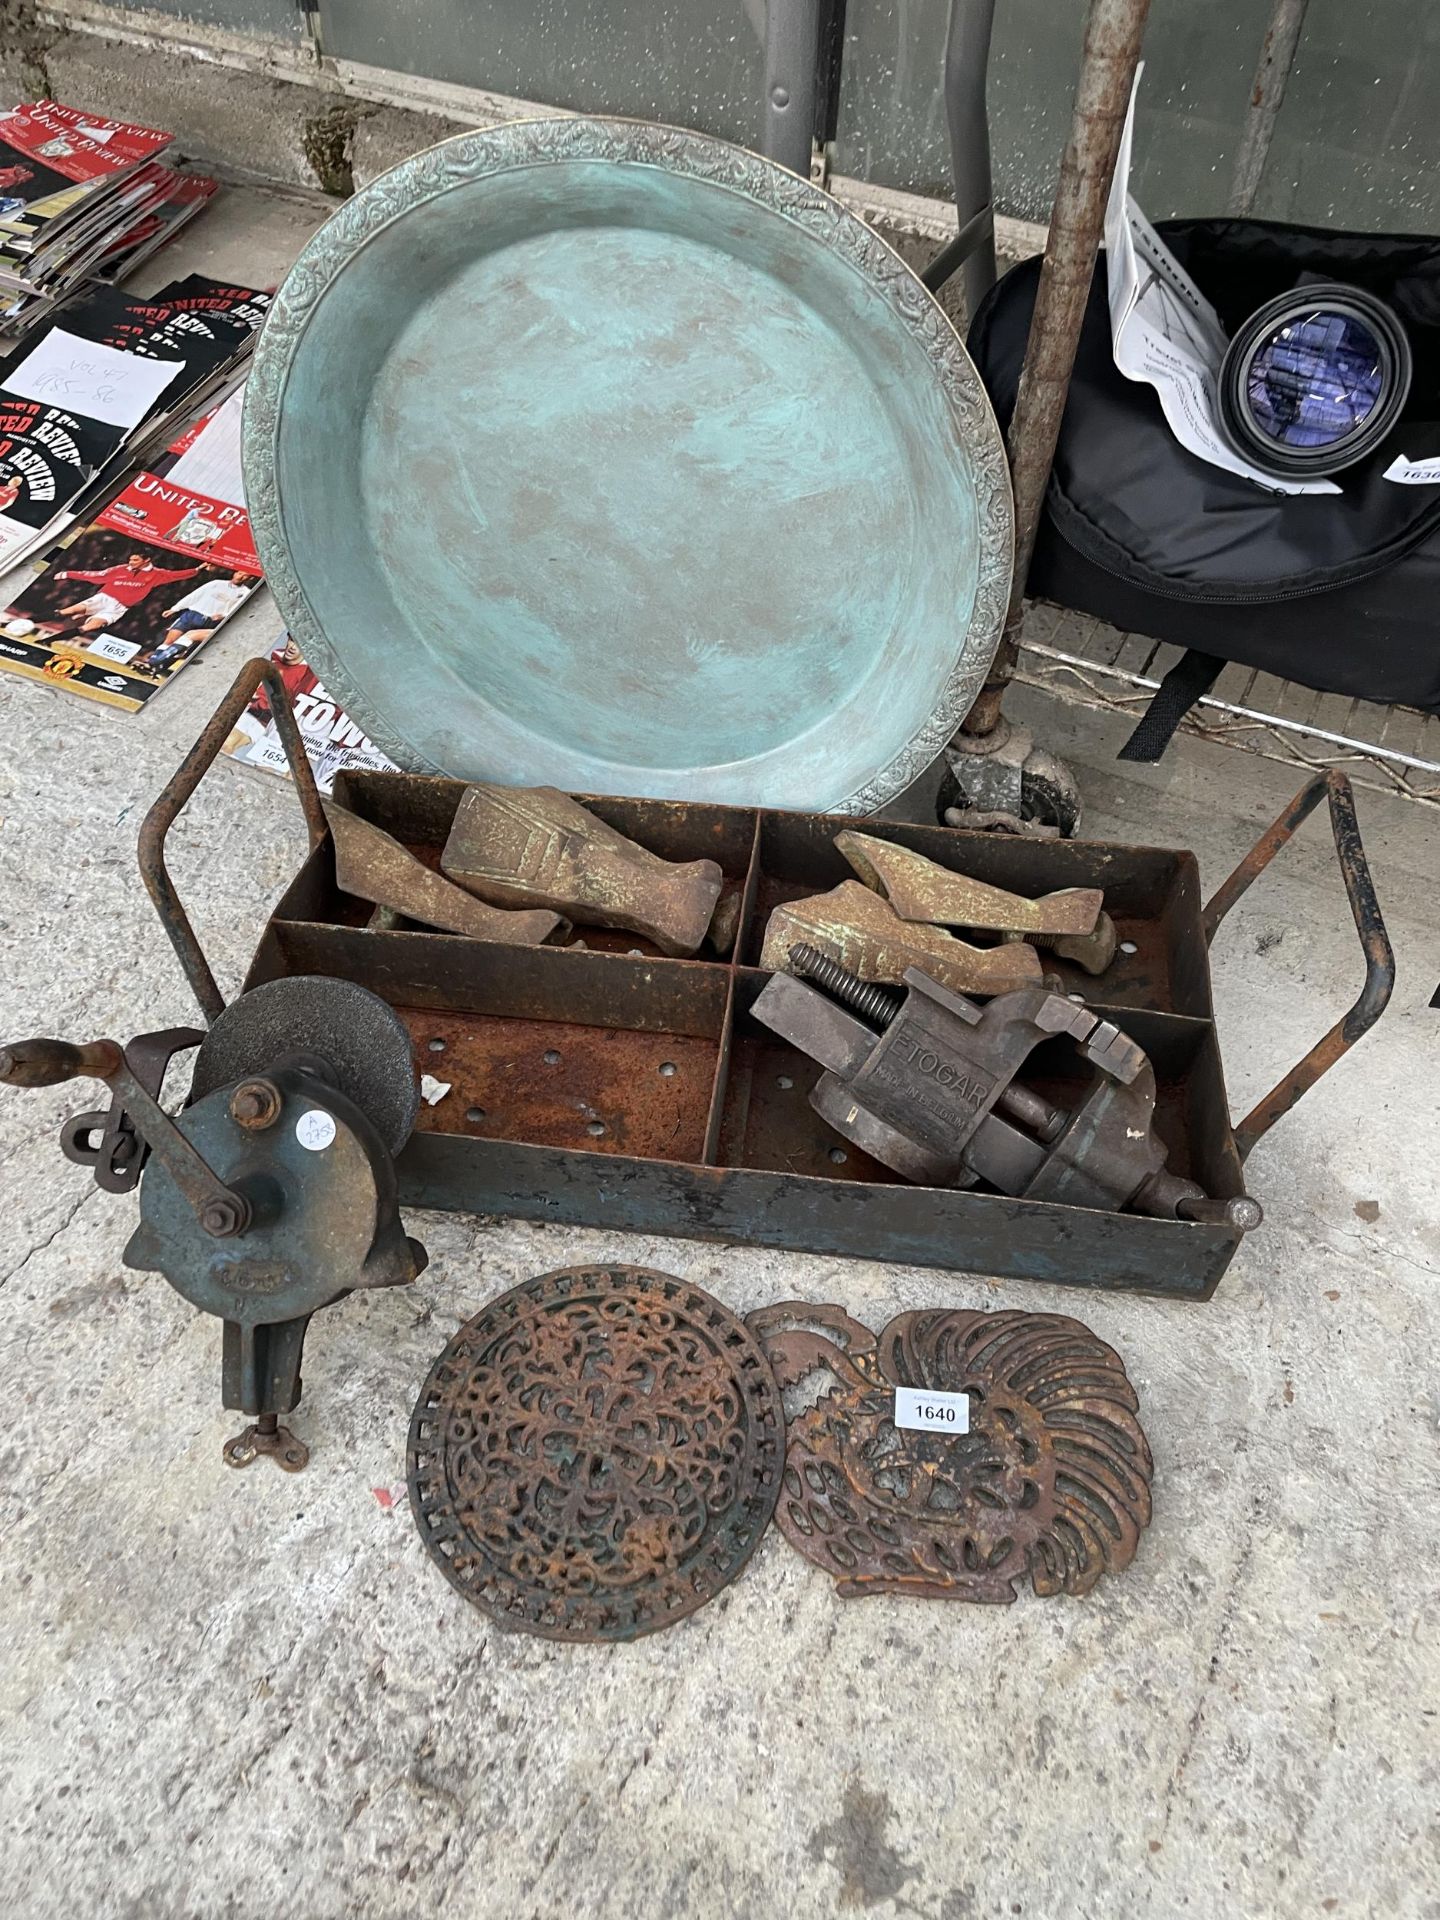 AN ASSORTMENT OF VINTAGE METAL ITEMS TO INCLUDE A BENCH VICE, BATH FEET AND A GRIND STONE ETC